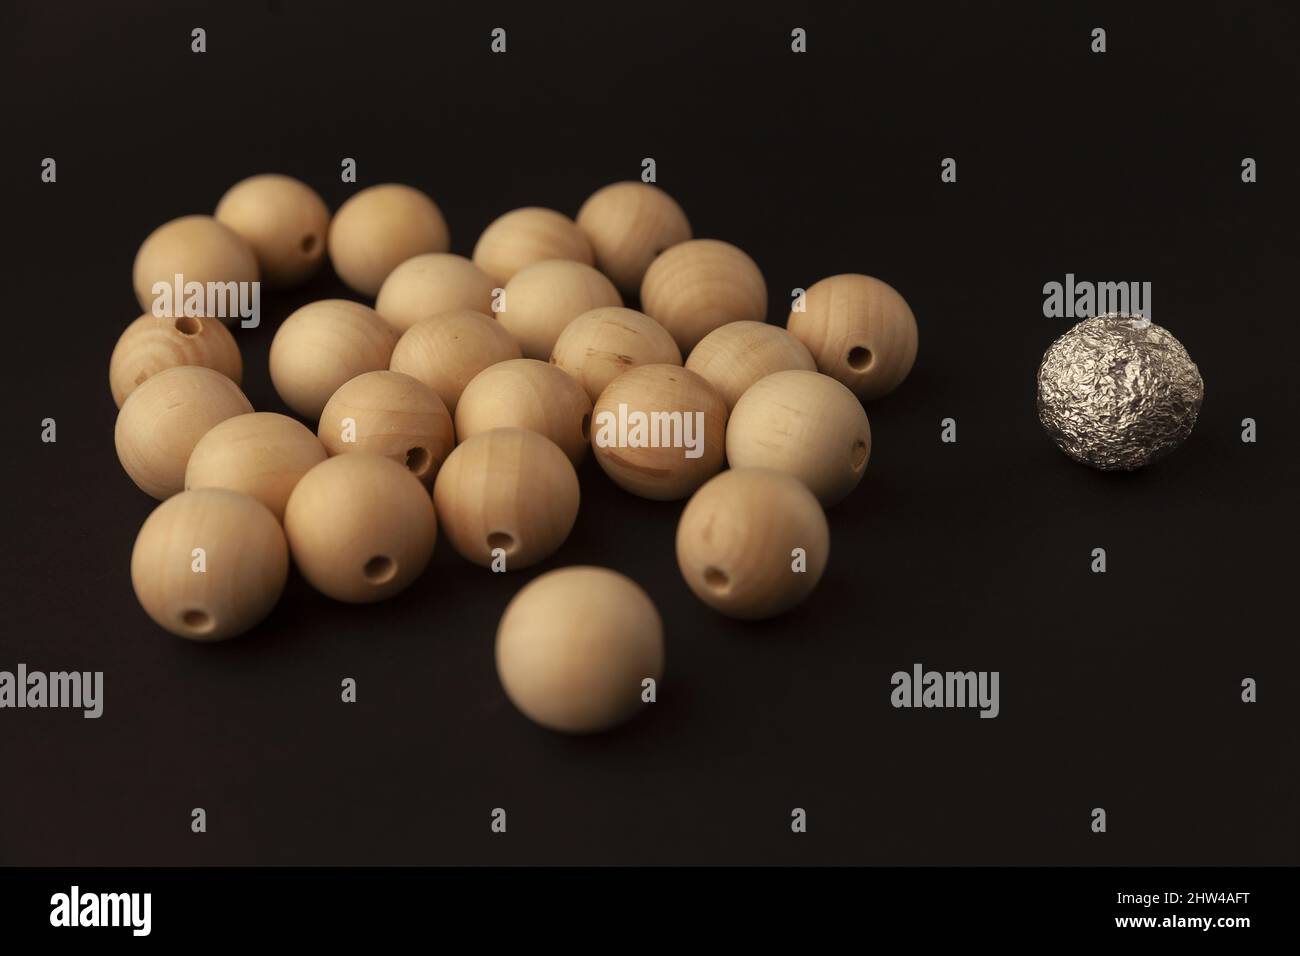 wooden balls against one silver ball, alone against all, close up Stock Photo